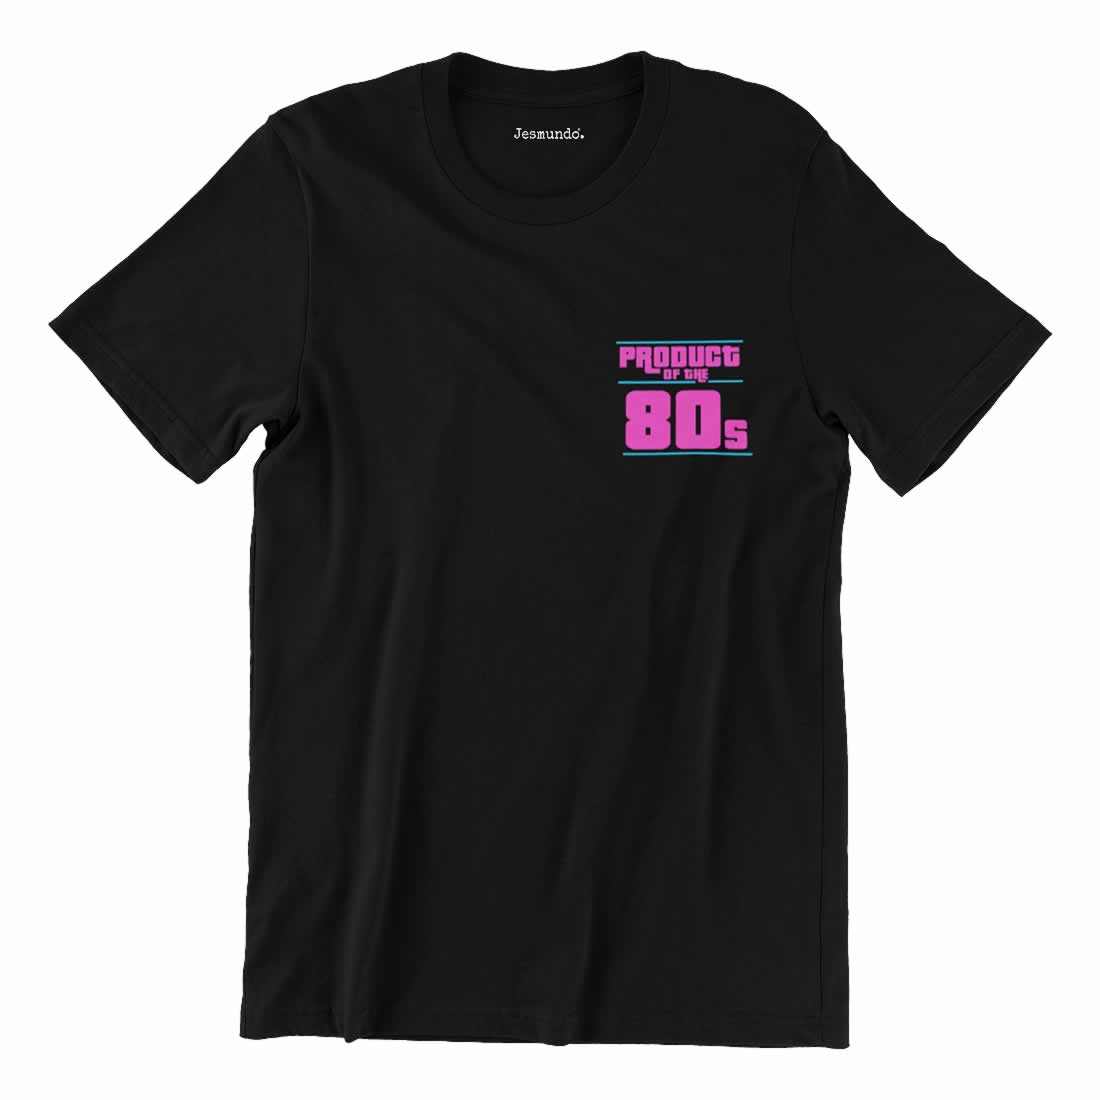 Product Of The 80s T Shirt